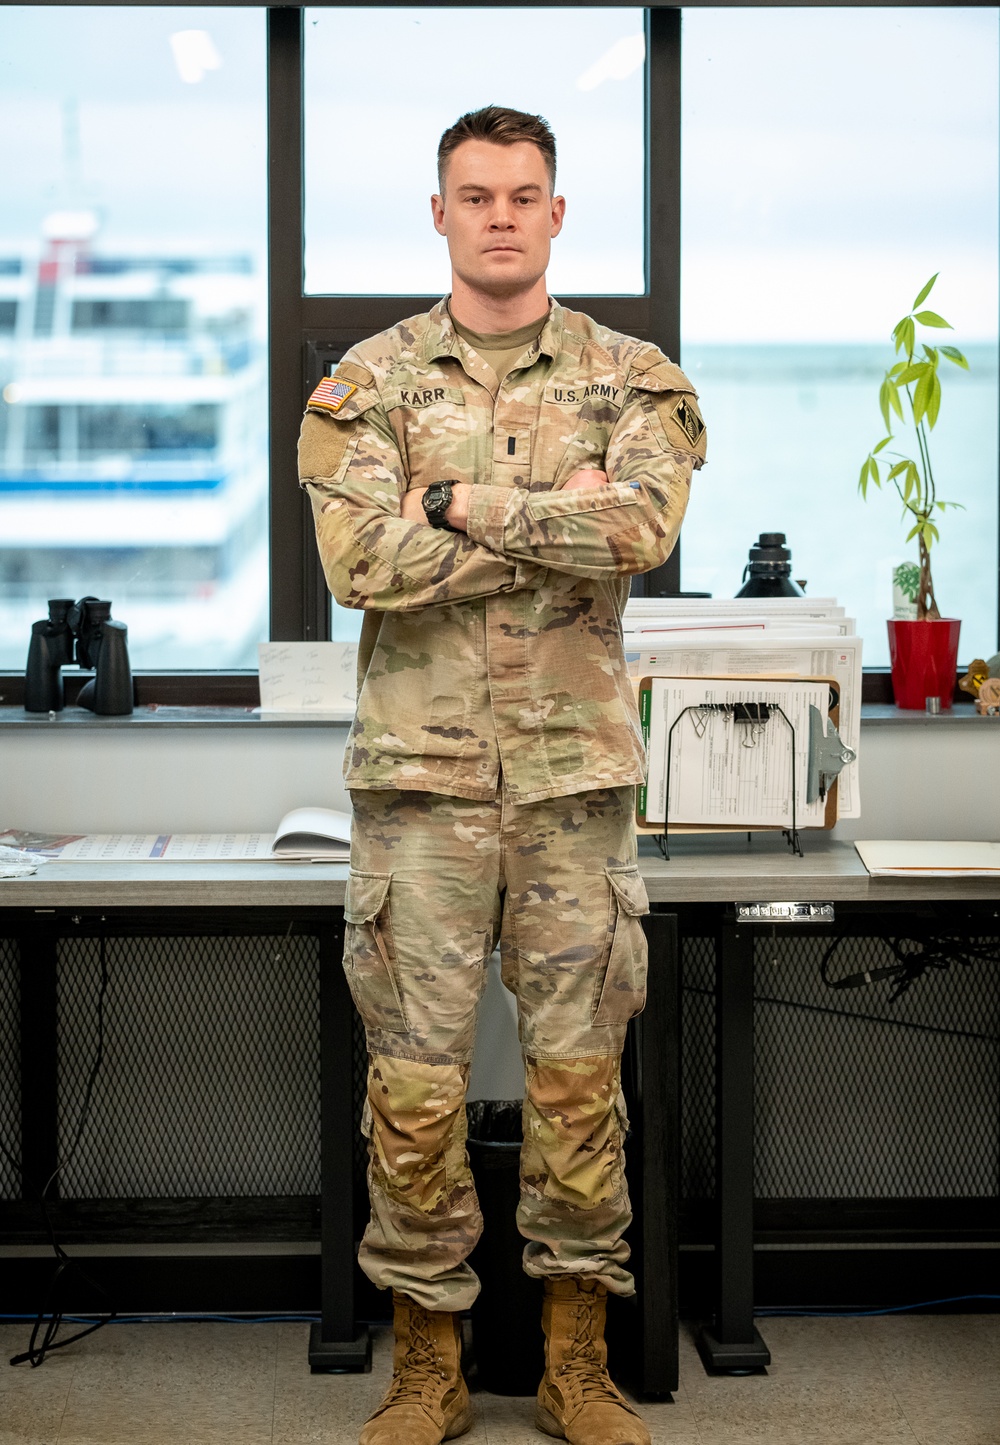 U.S. Army Lieutenant Dylan Karr joins the USACE Buffalo District